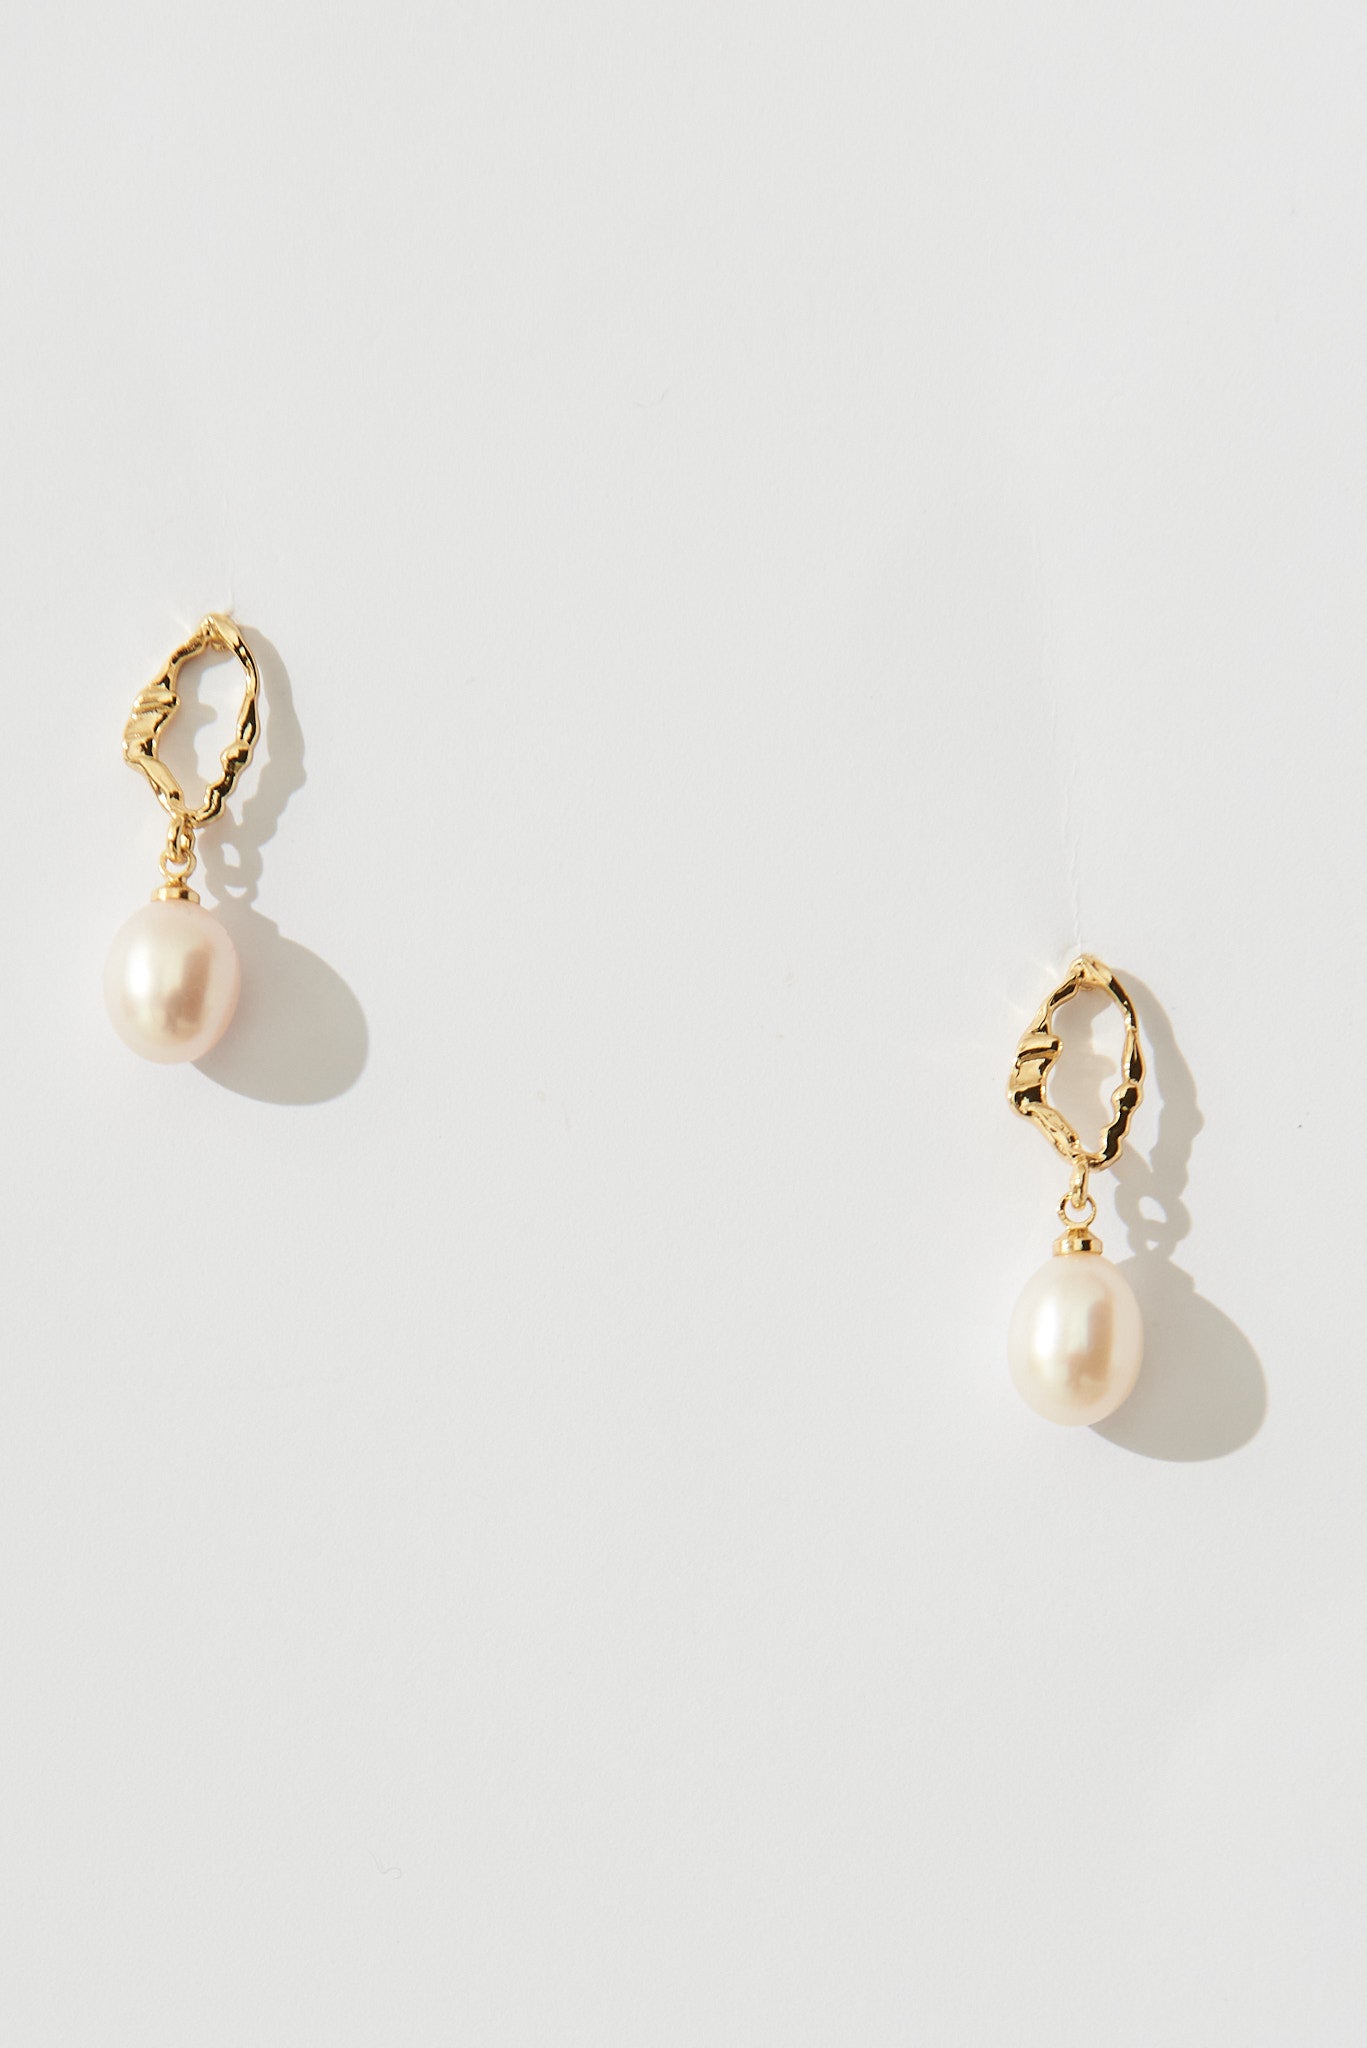 August + Delilah Lorient Drop Earrings In Gold With Faux Pearl - front